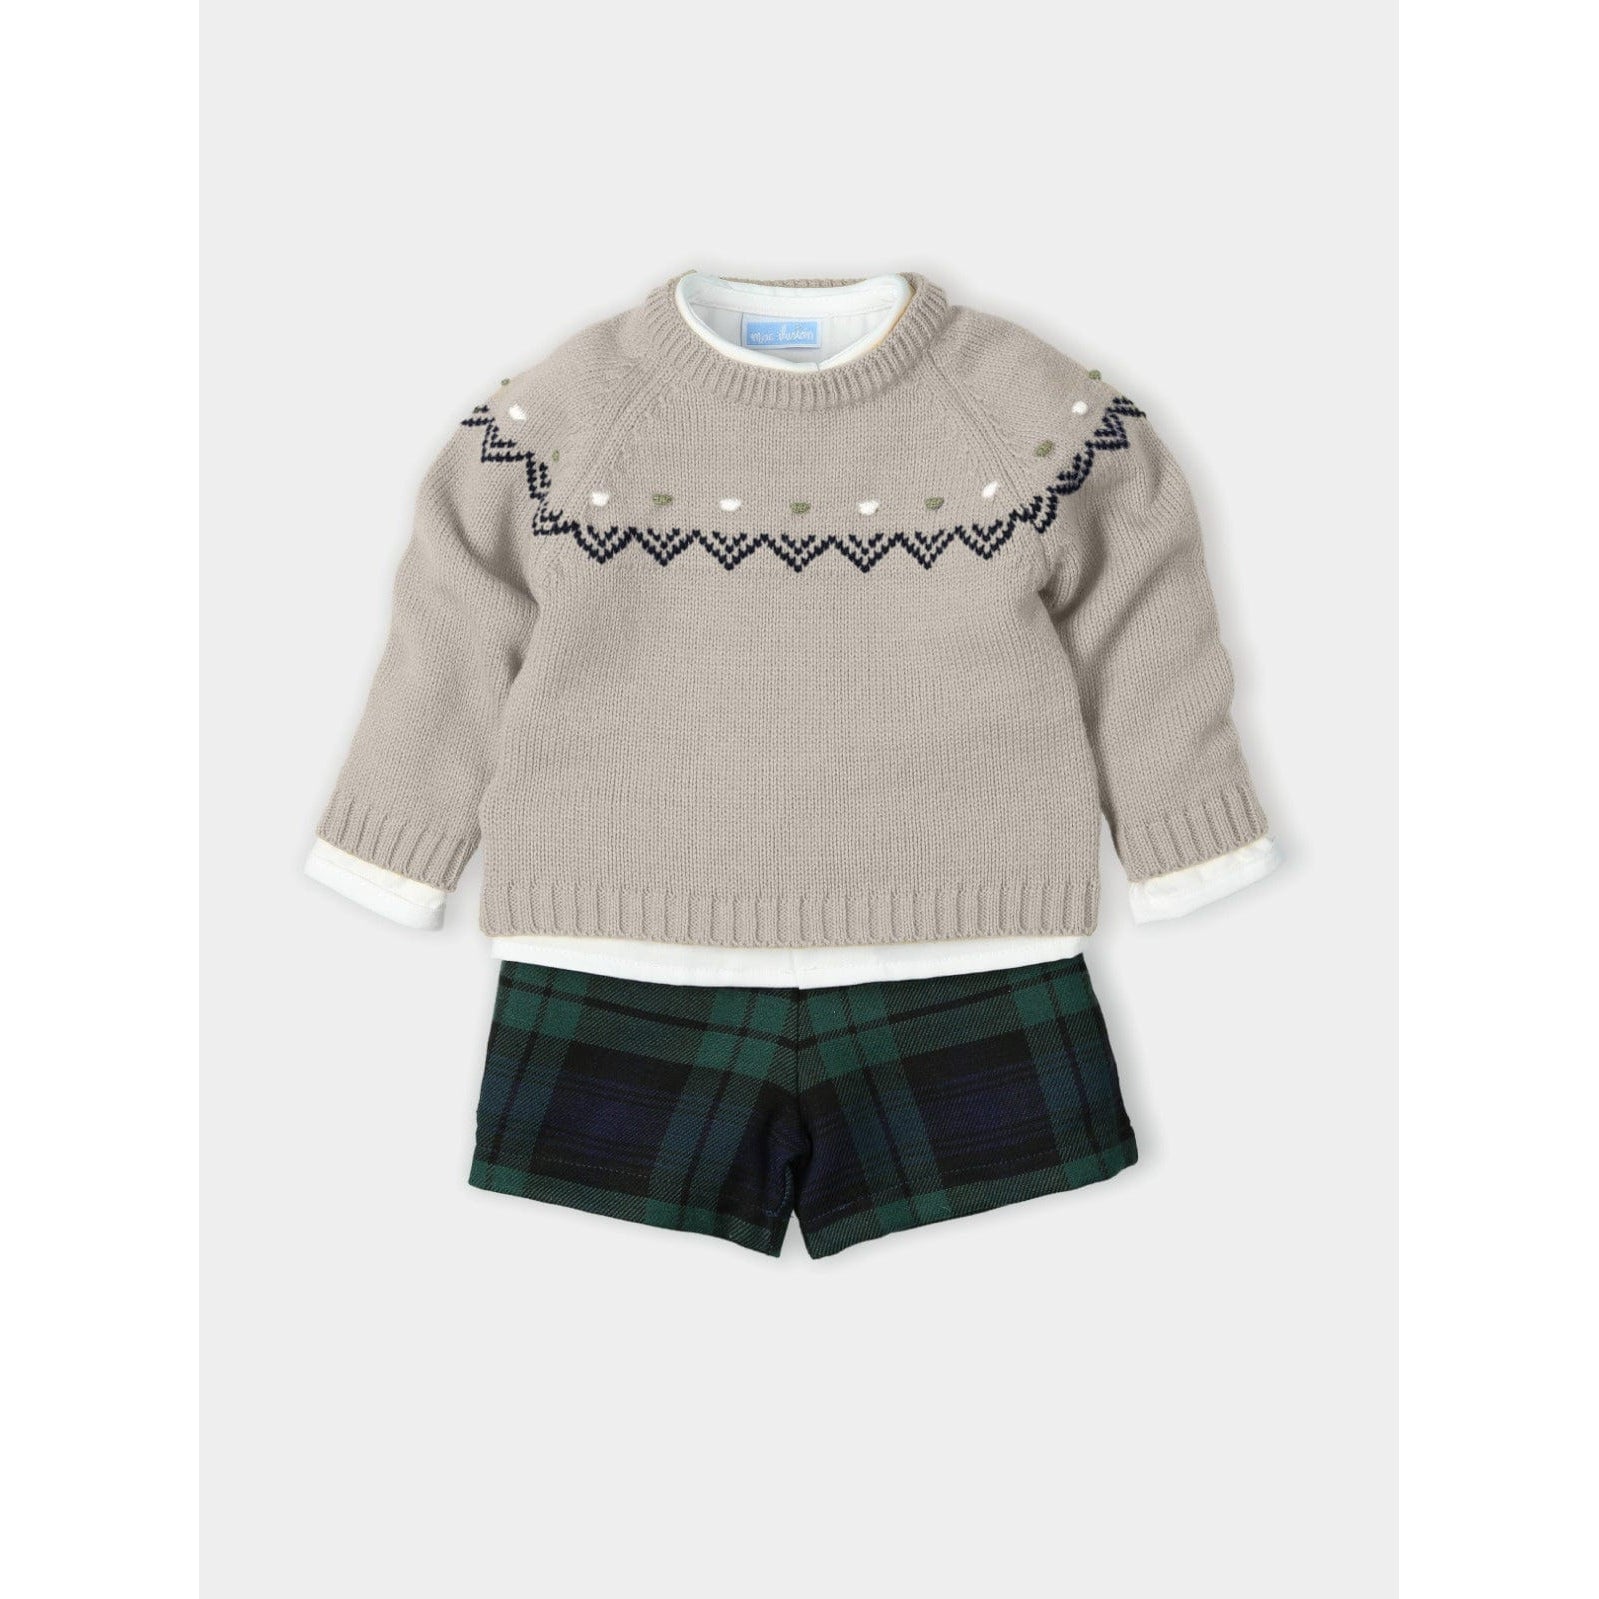 Mac Ilusion Tops & Shorts 6m Mac Ilusion  Baby Boys Walnut Knitted Sweater Shorts And Cotton Shirt Outfits